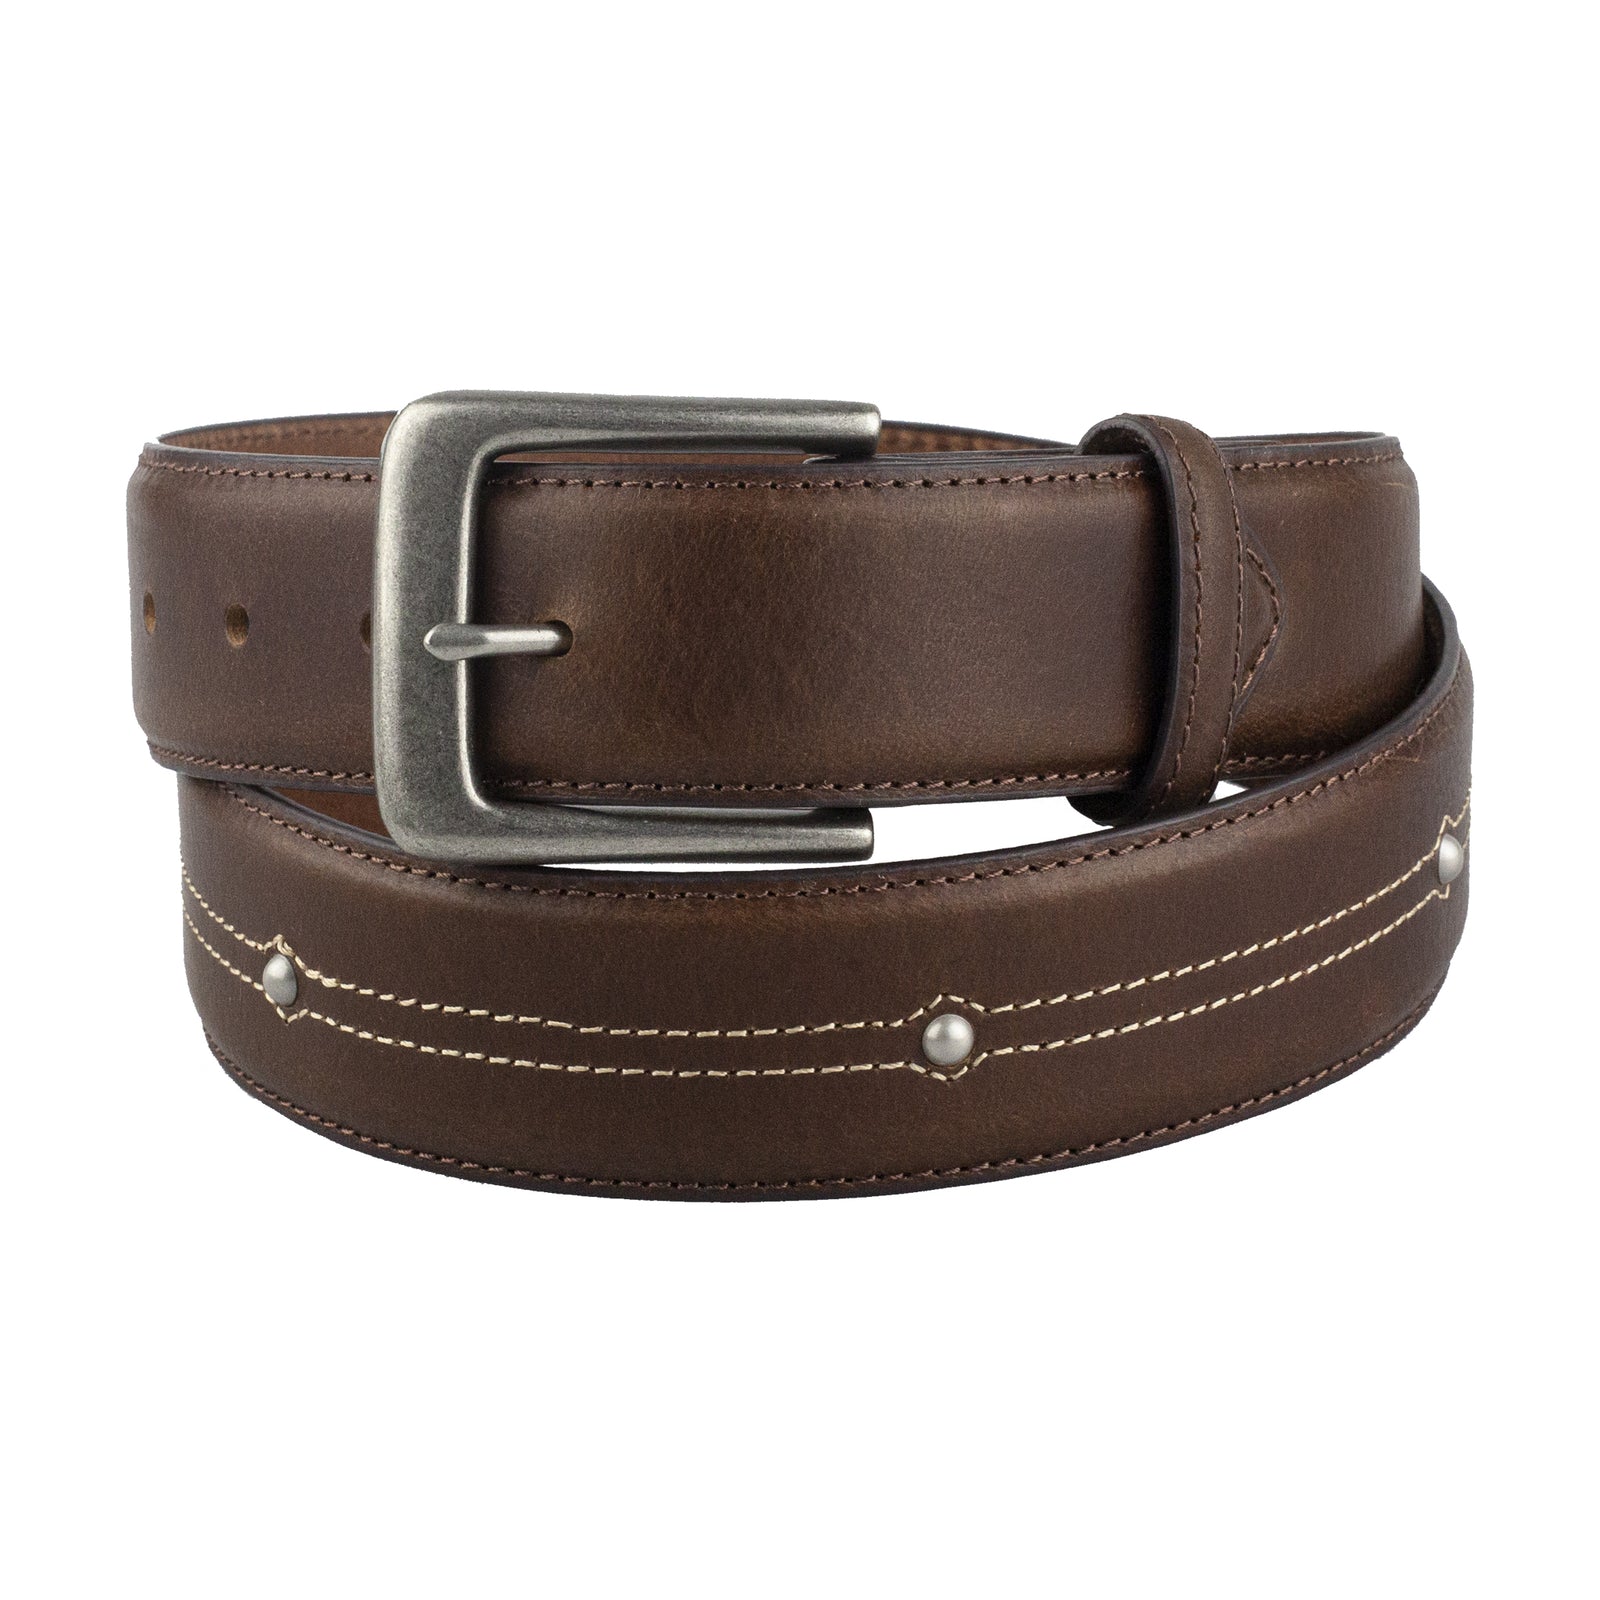 1 1/2 Double Stitch Belt - AndWest